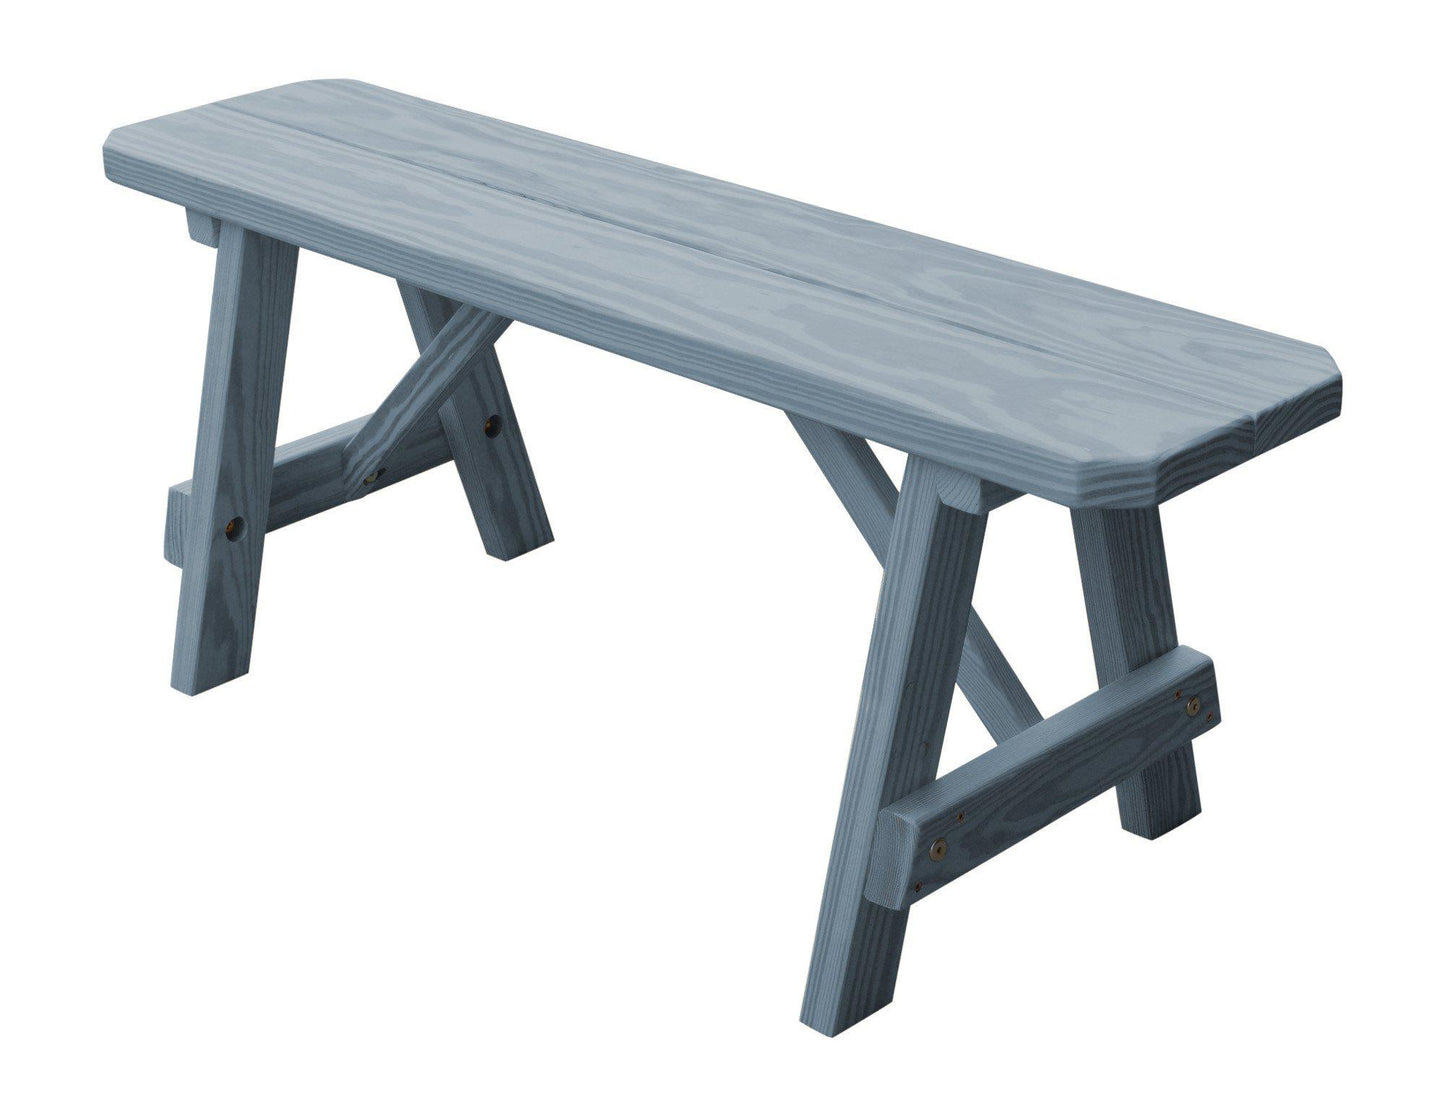 A&L Furniture Co. Yellow Pine 44" Traditional Bench Only - LEAD TIME TO SHIP 10 BUSINESS DAYS